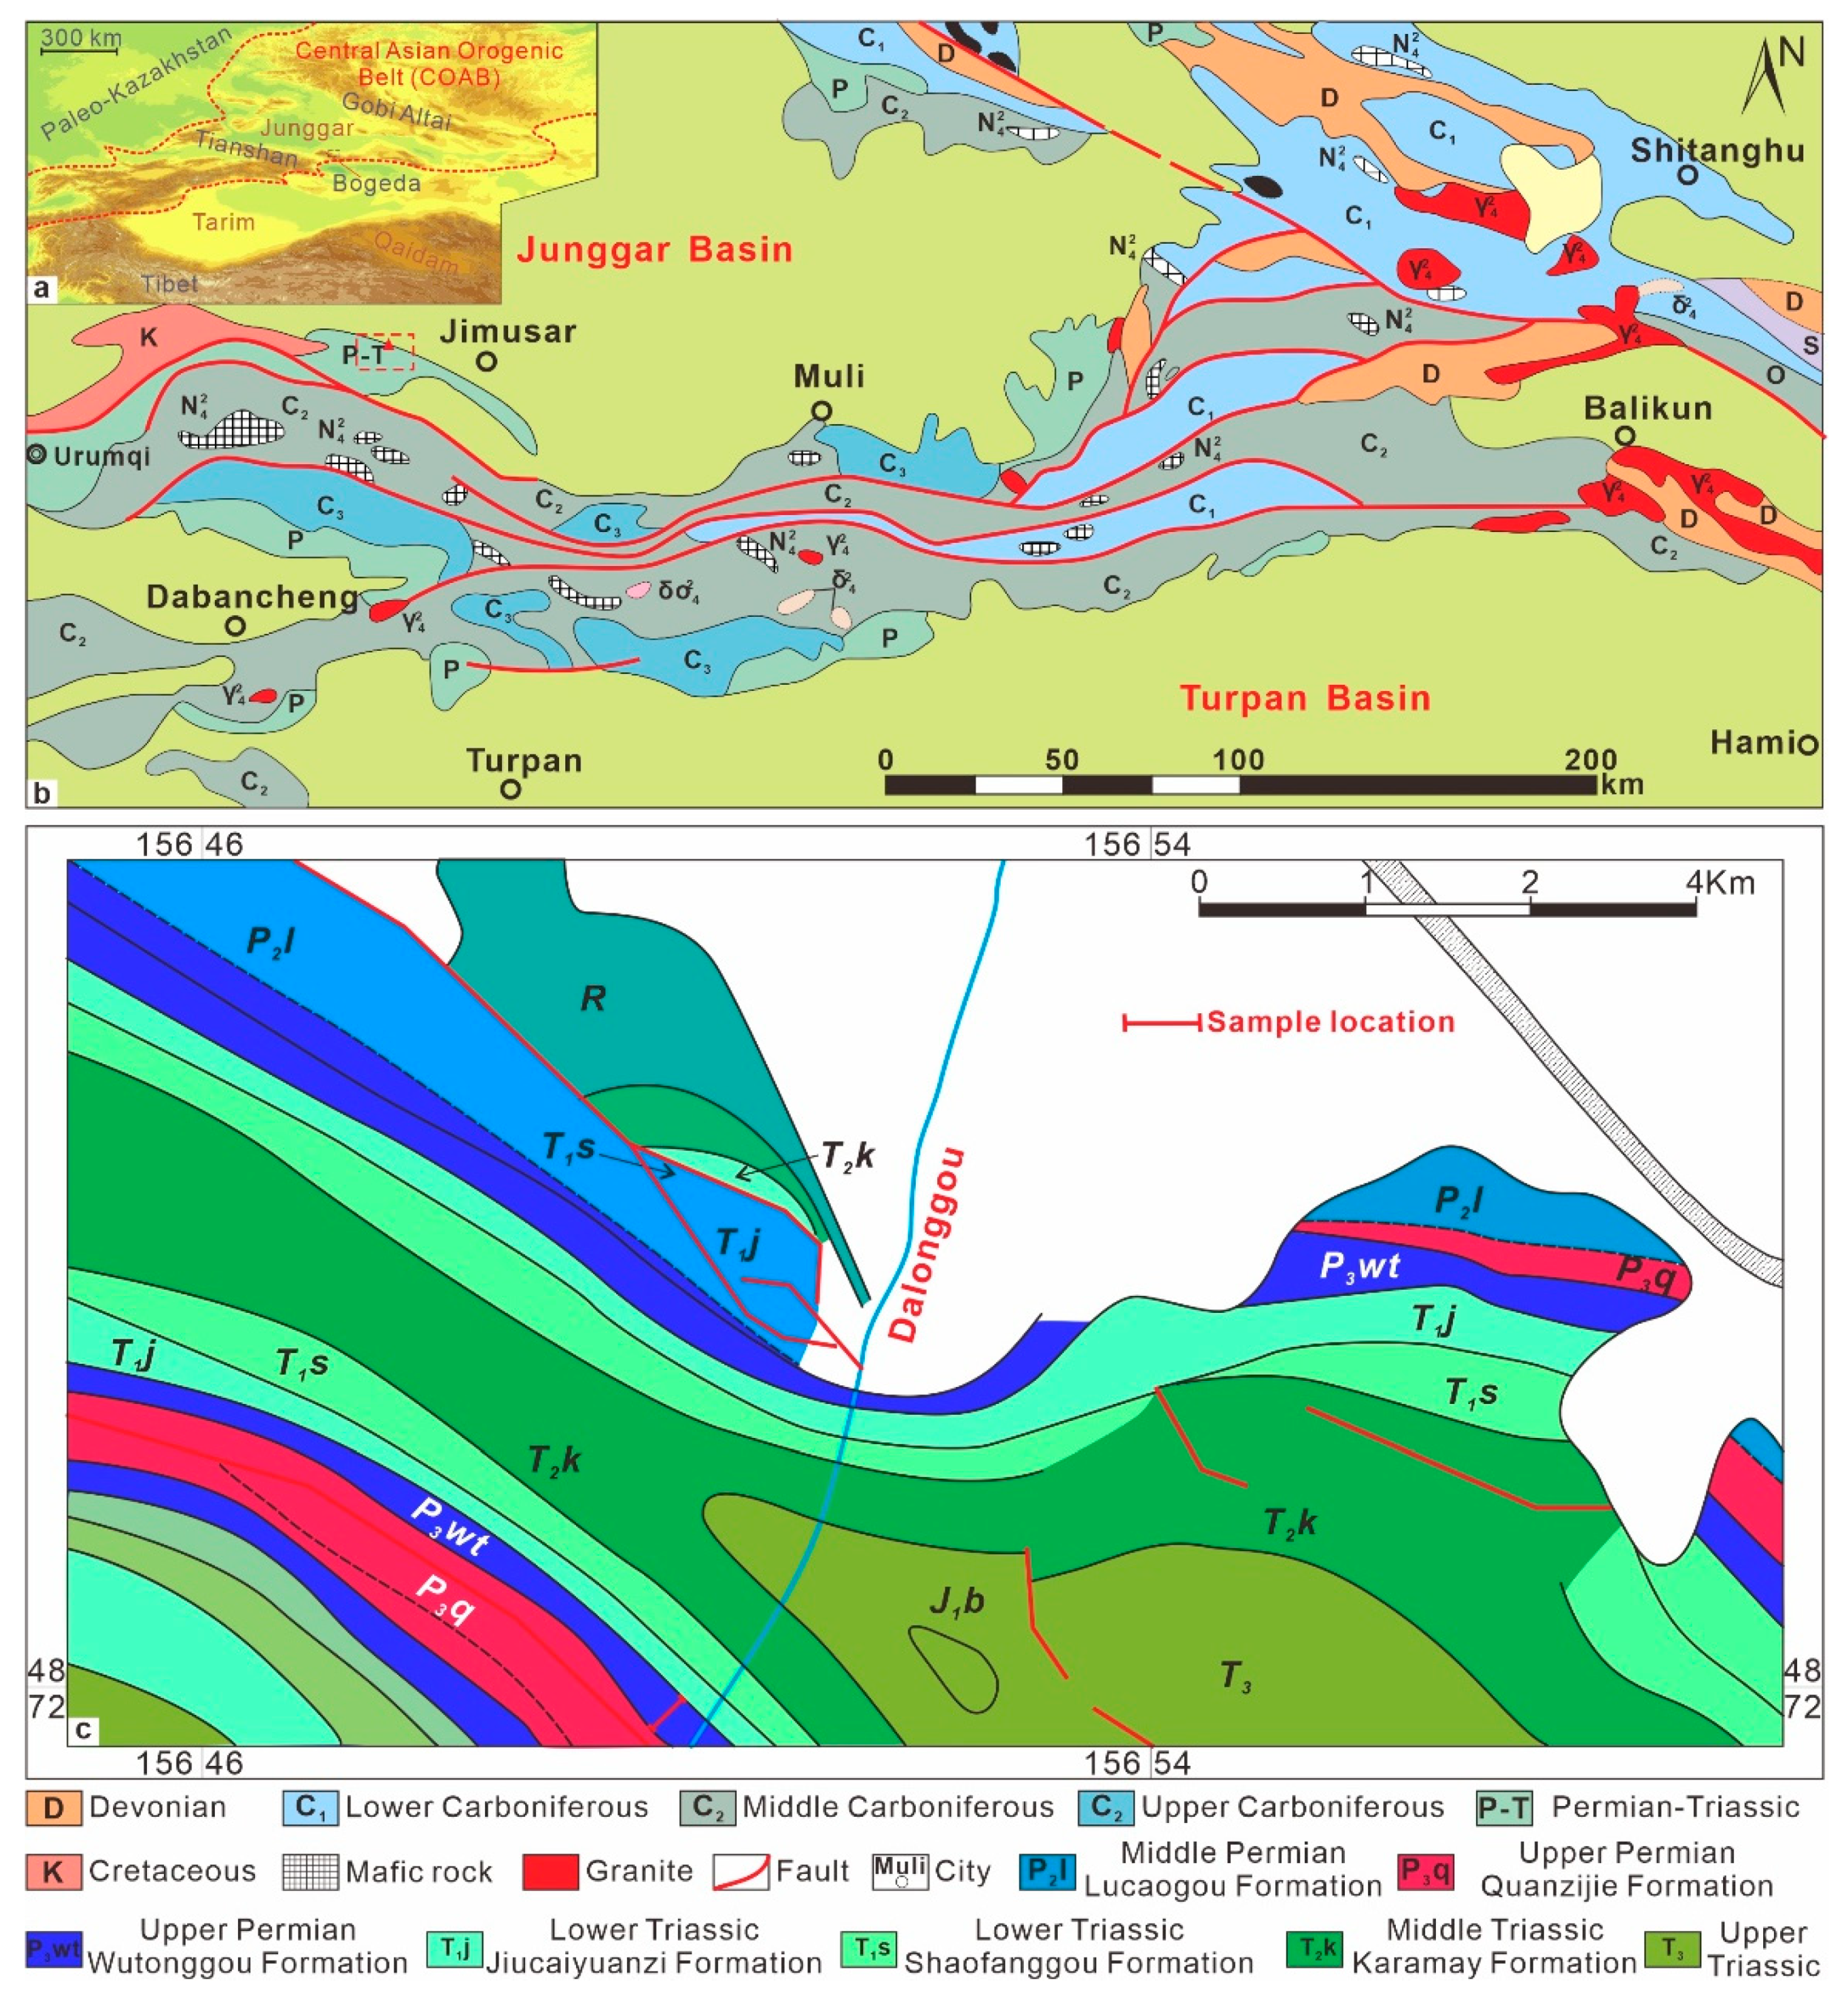 The Central Asian Orogenic Belt (CAOB) during Late Devonian: new